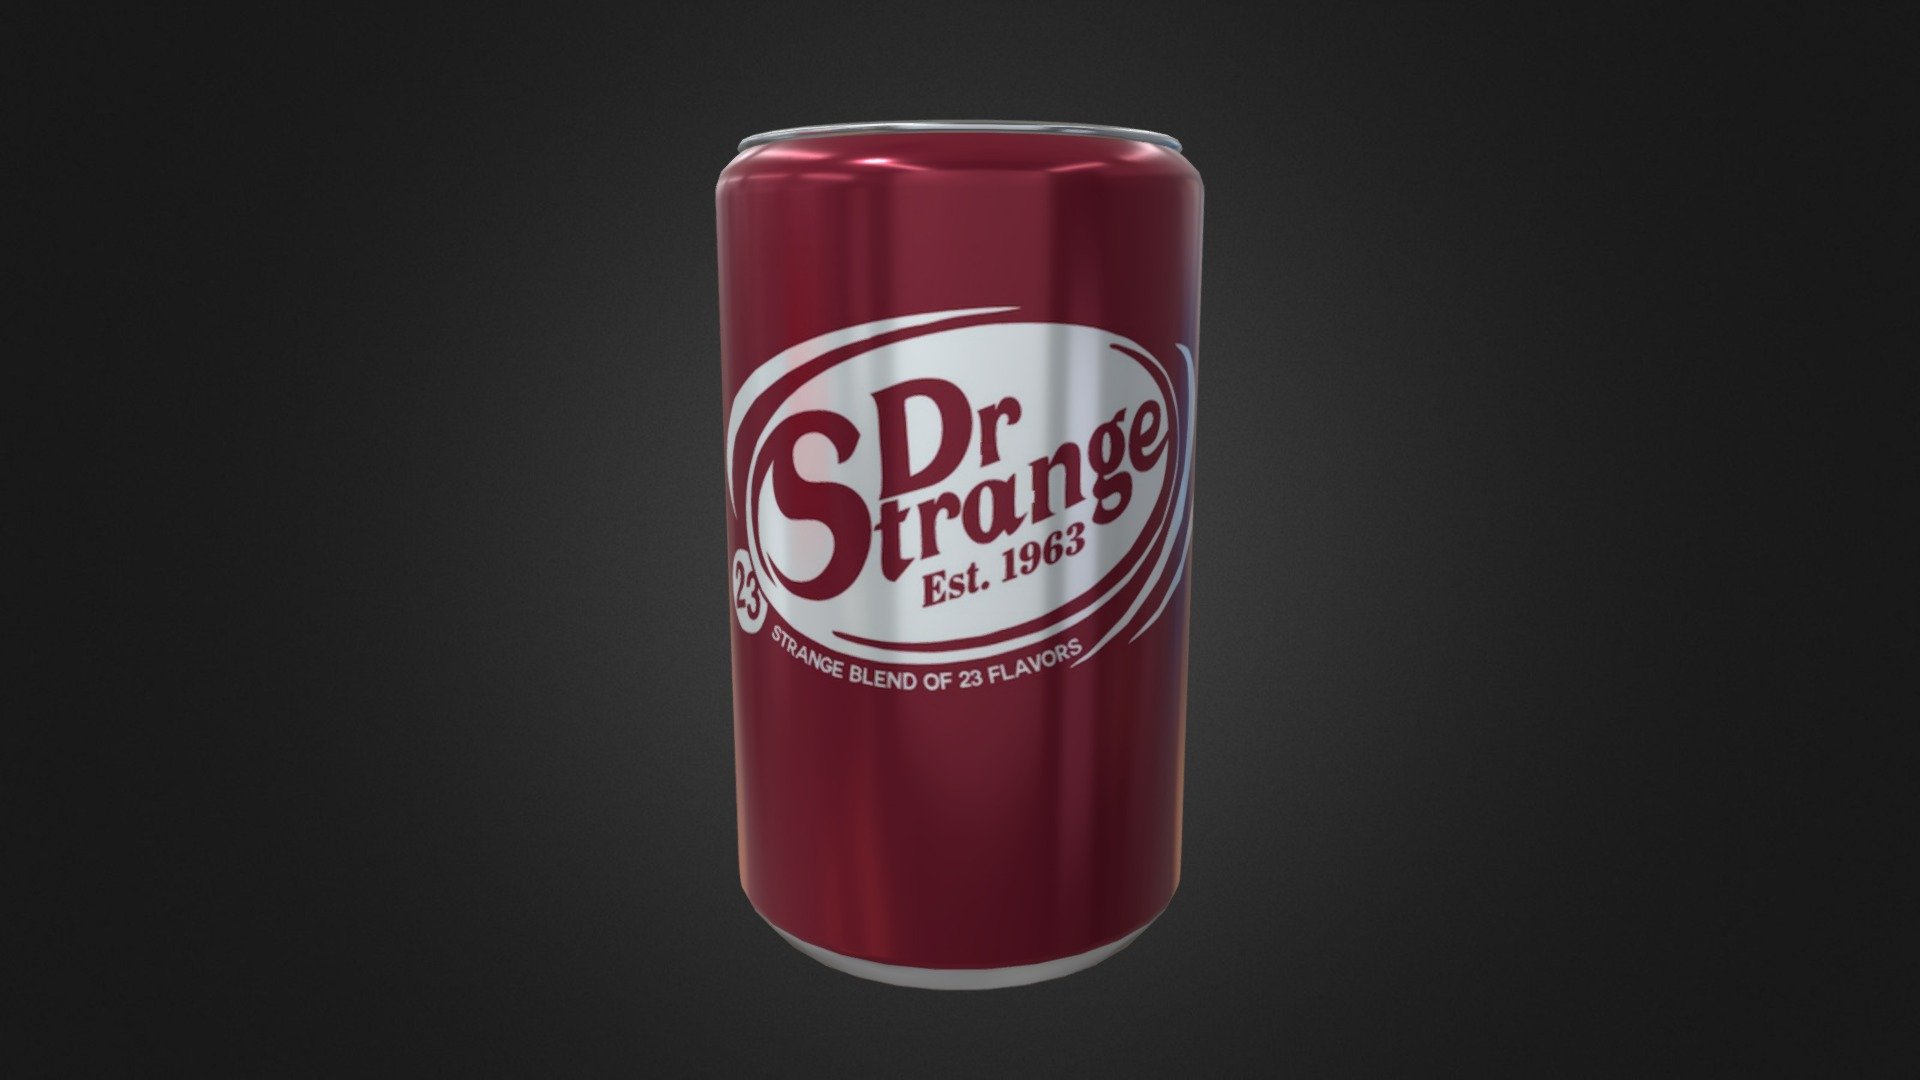 Dr. Strange is in Fortinite, and I thought of this. they should make this a skin for the shield potion.

This soda is the source of Dr. Strange's power.

link to diet version - Dr Strange soda can - Buy Royalty Free 3D model by viking1 3d model